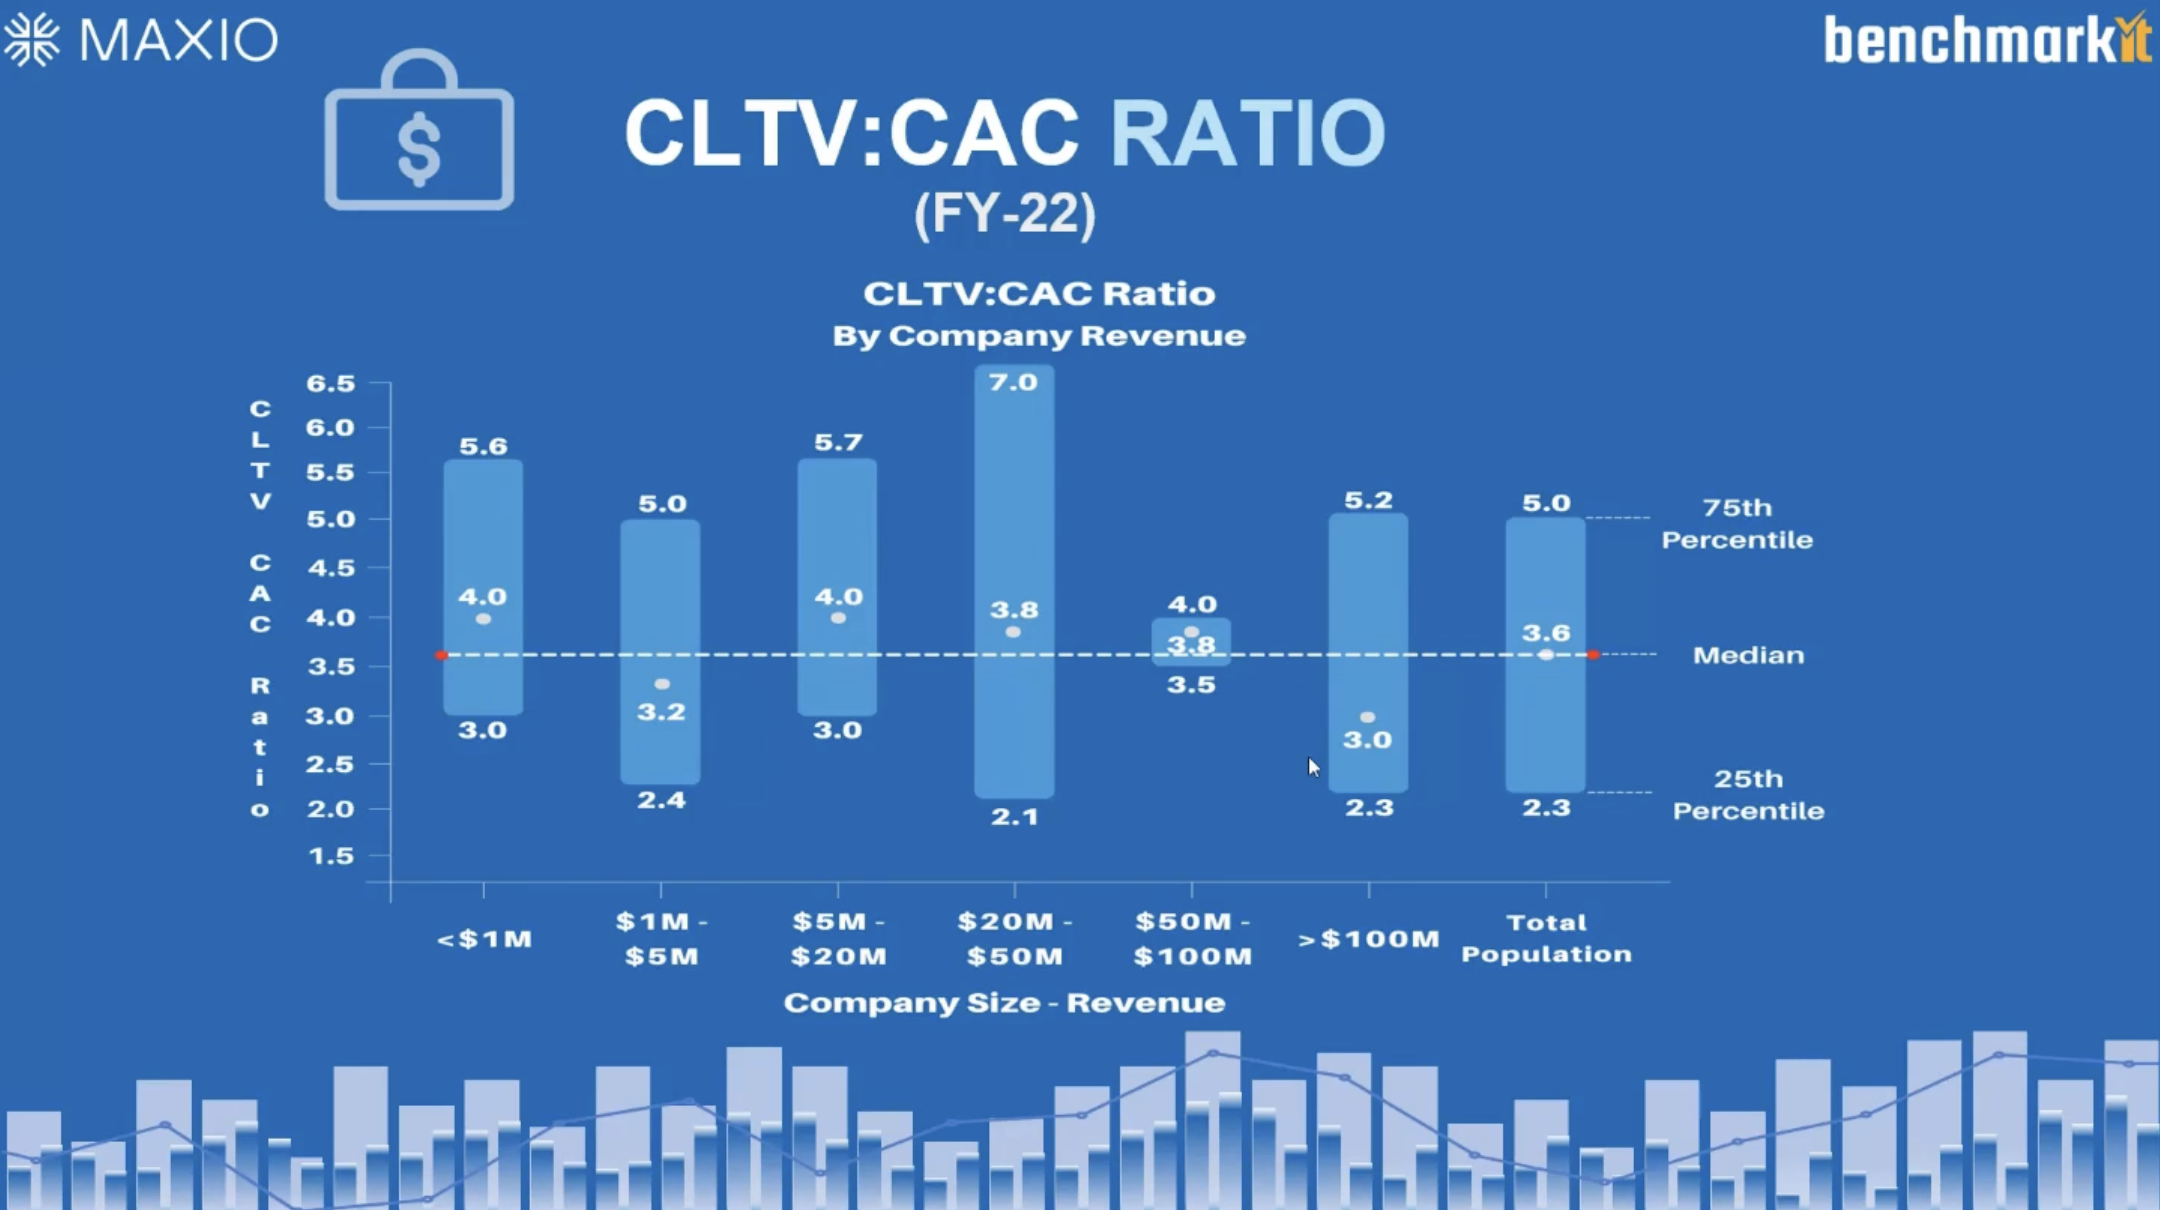 Maxio and Benchmarkit's FY-2022 CLTV to CAC Ratio chart